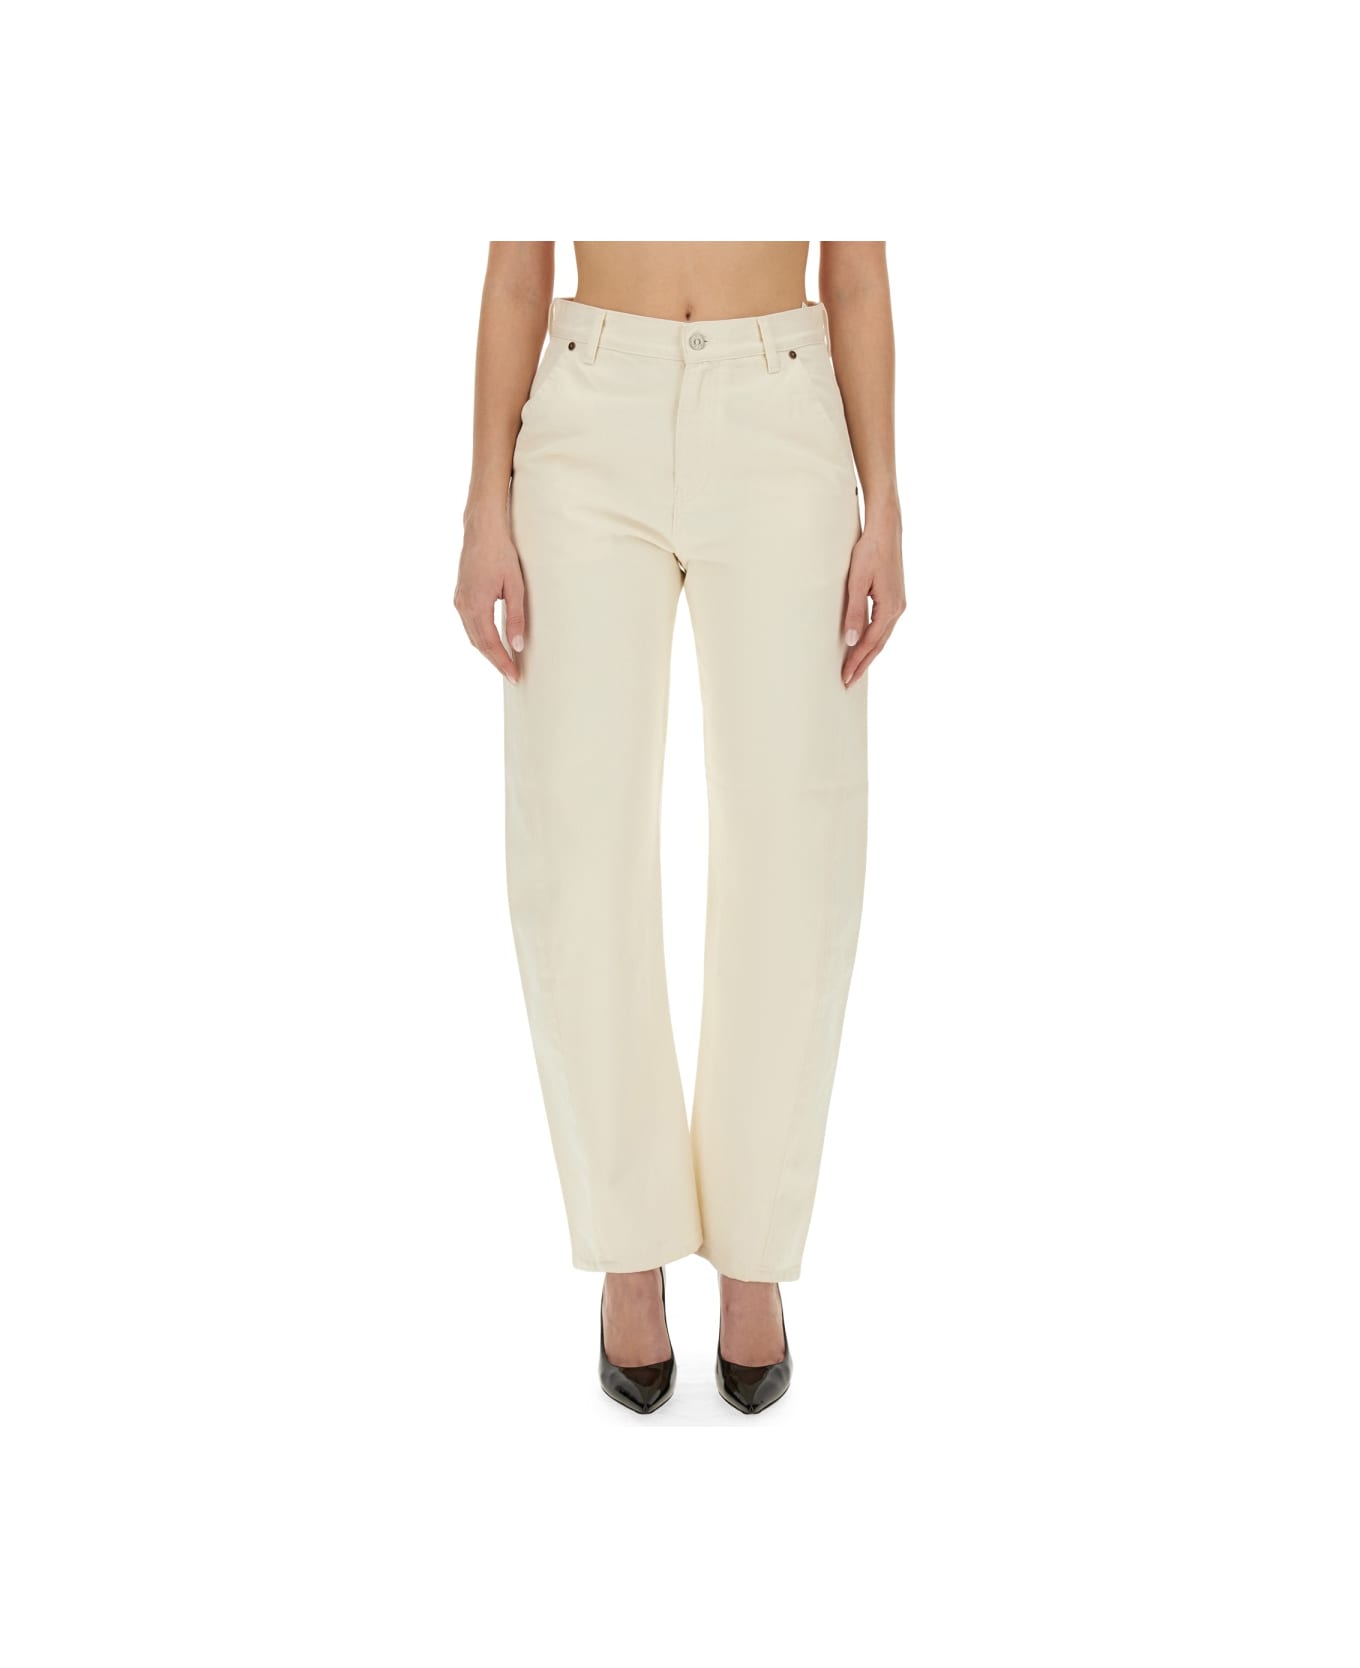 Victoria Beckham Relaxed Fit Jeans - POWDER ボトムス